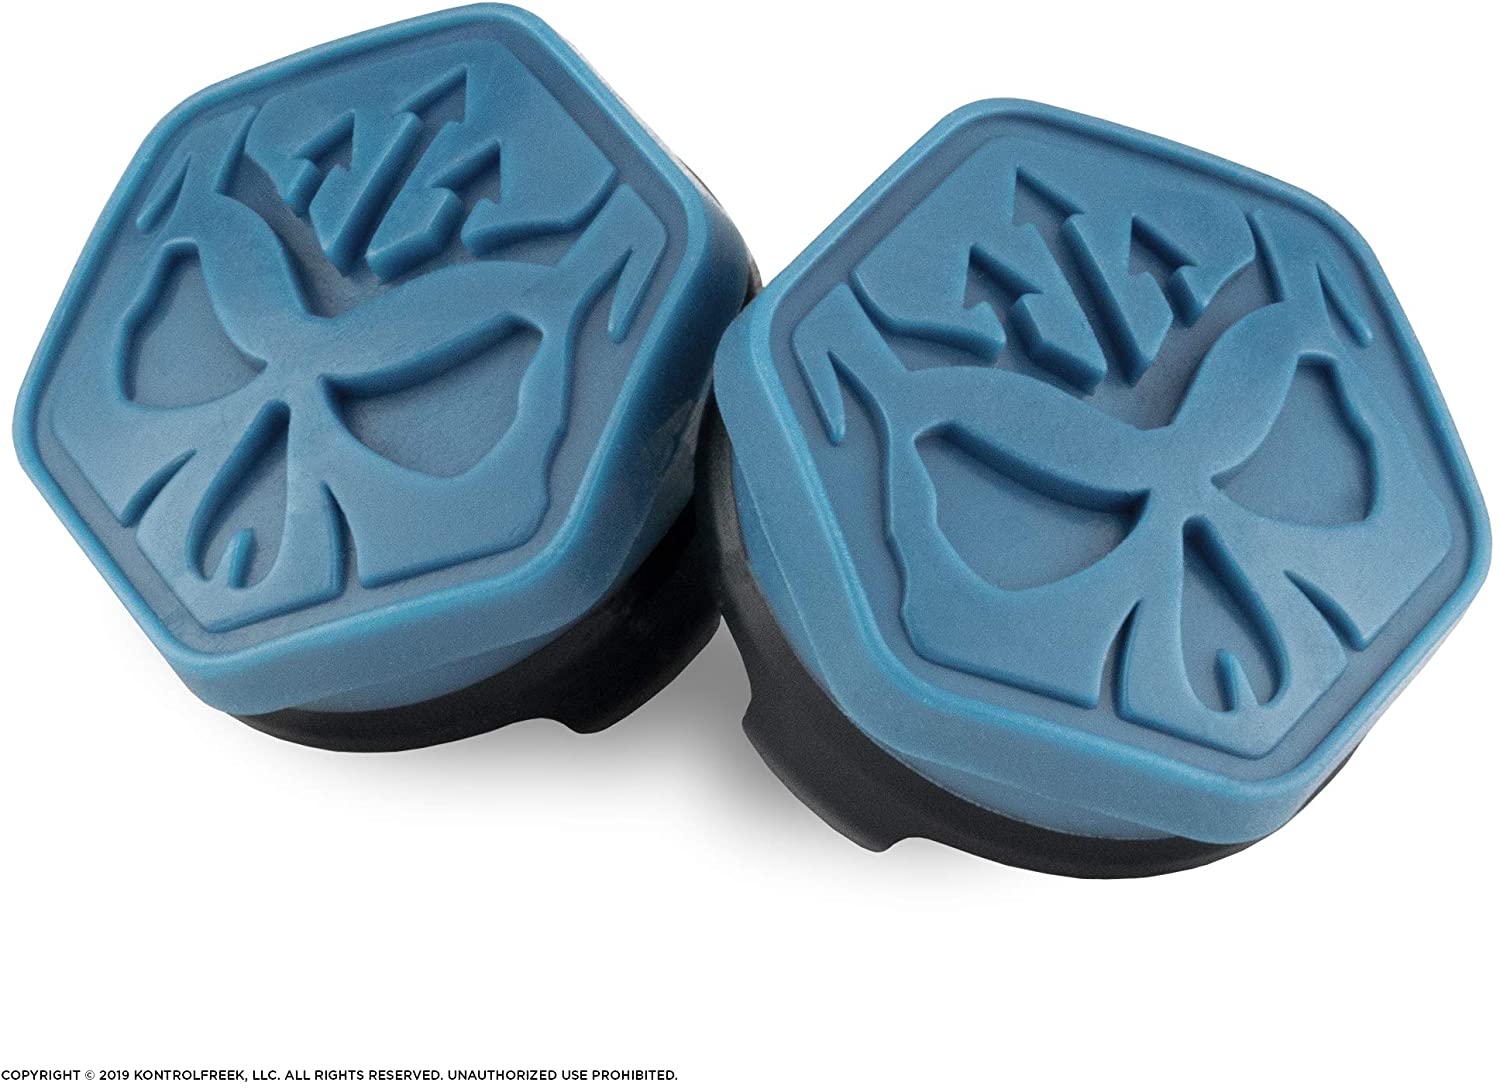 KontrolFreek Call of Duty Modern Warfare Performance Thumbsticks for PS4 and PS5 | Blue/Black